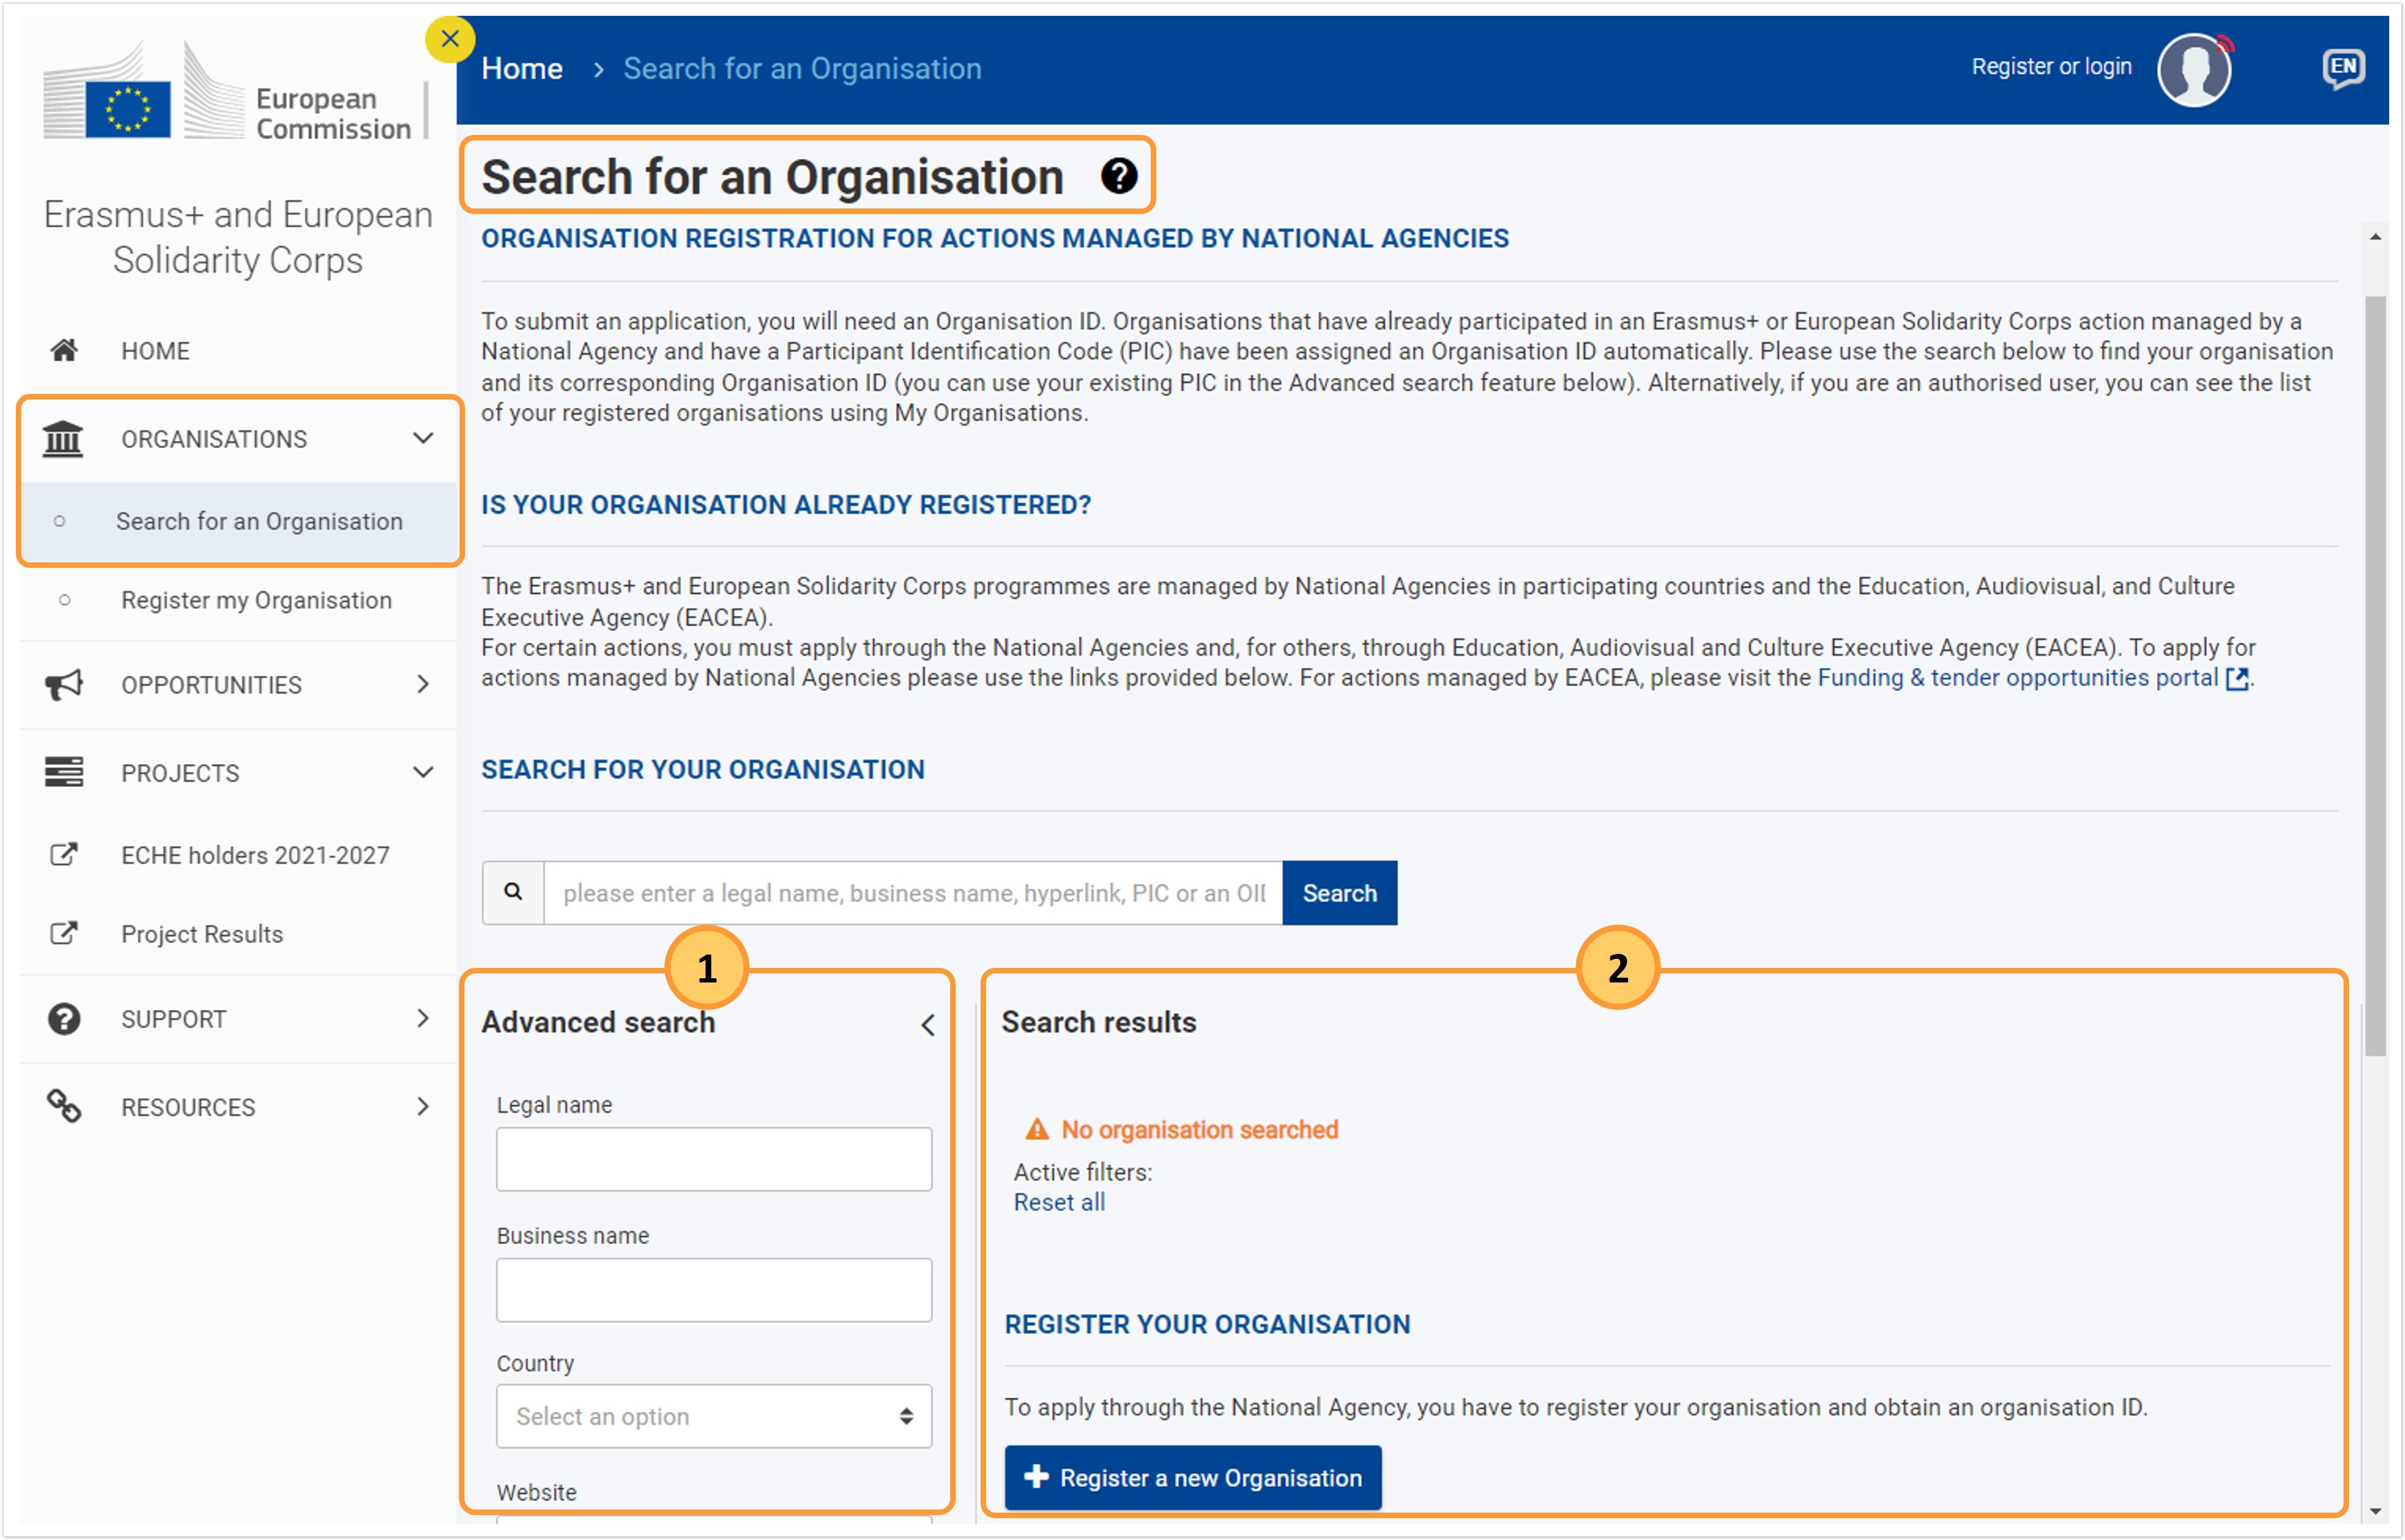 Example of Work area after selecting Search for organisation from the main menu